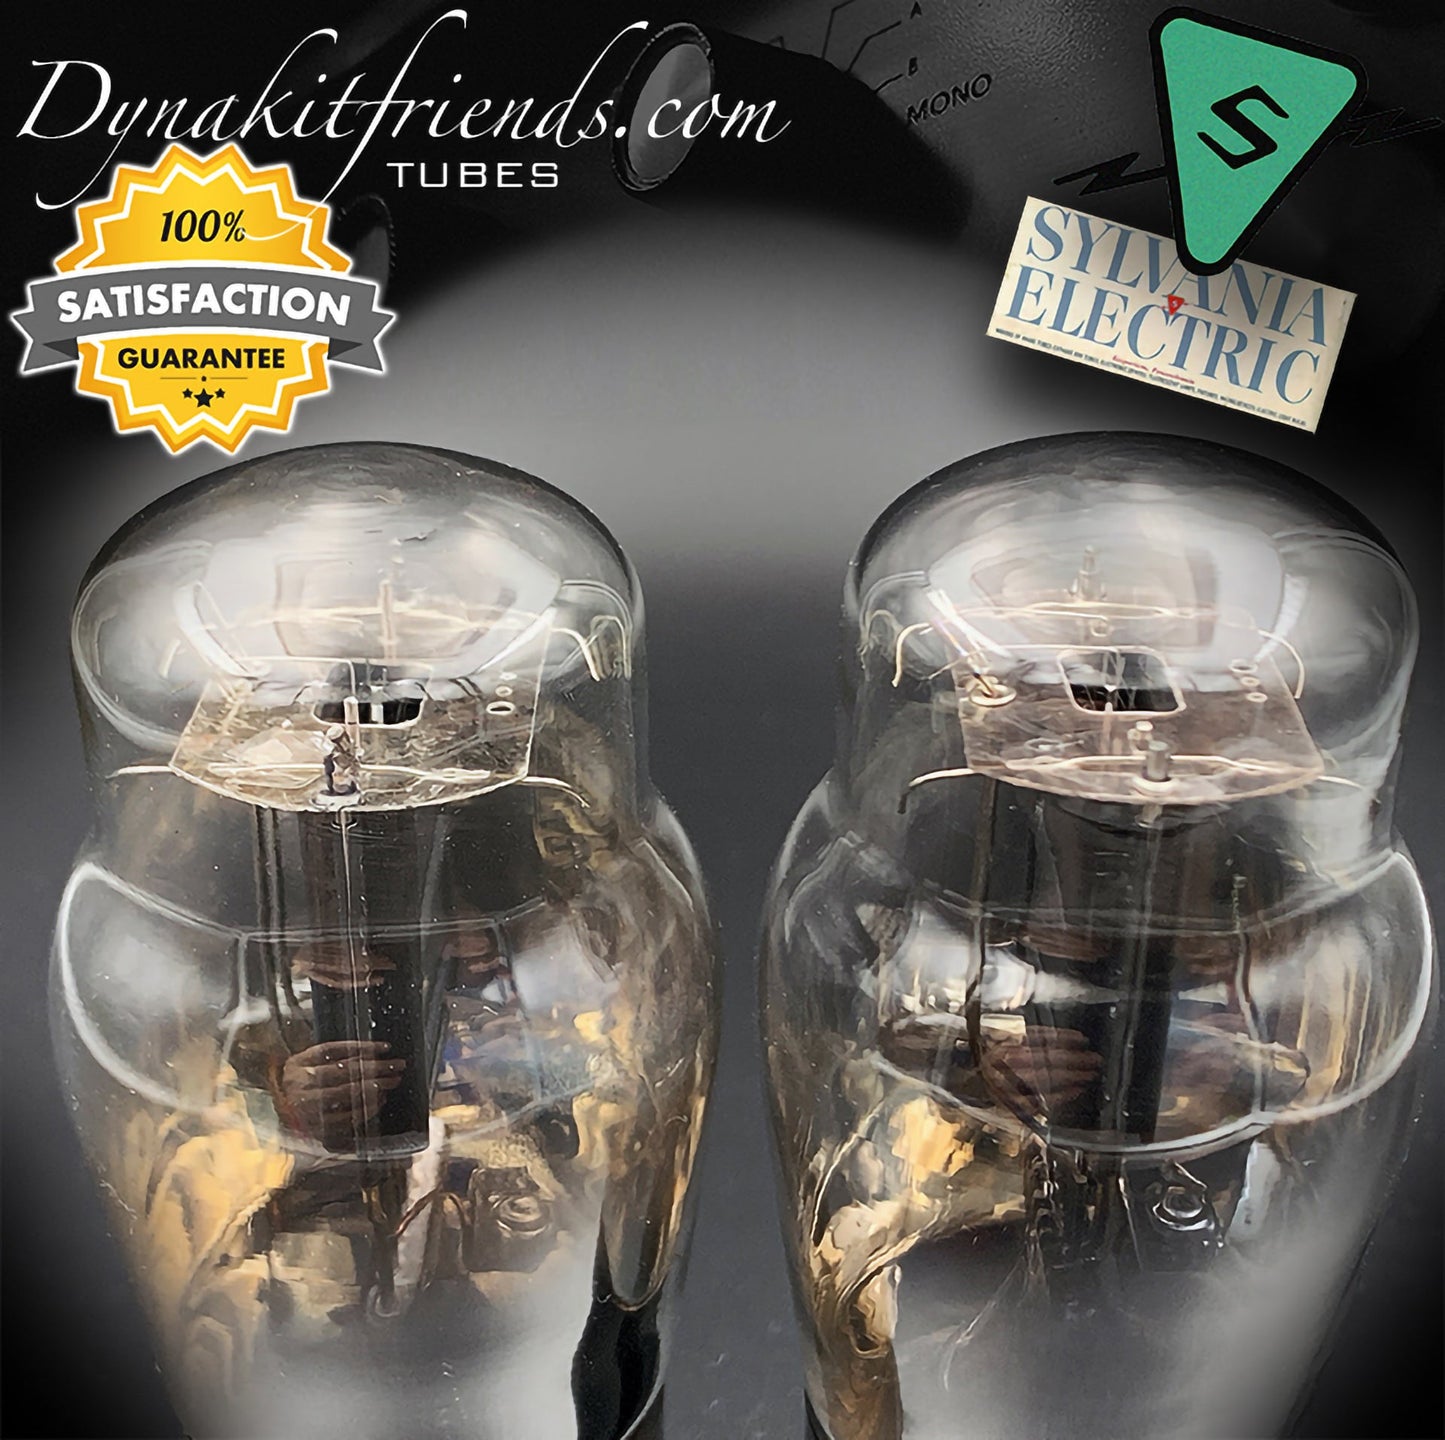 45 ST SYLVANIA Black Plates Foil Dimpled Getter Matched Pair Tubes Made in USA 1940's - Vacuum Tubes Treasures